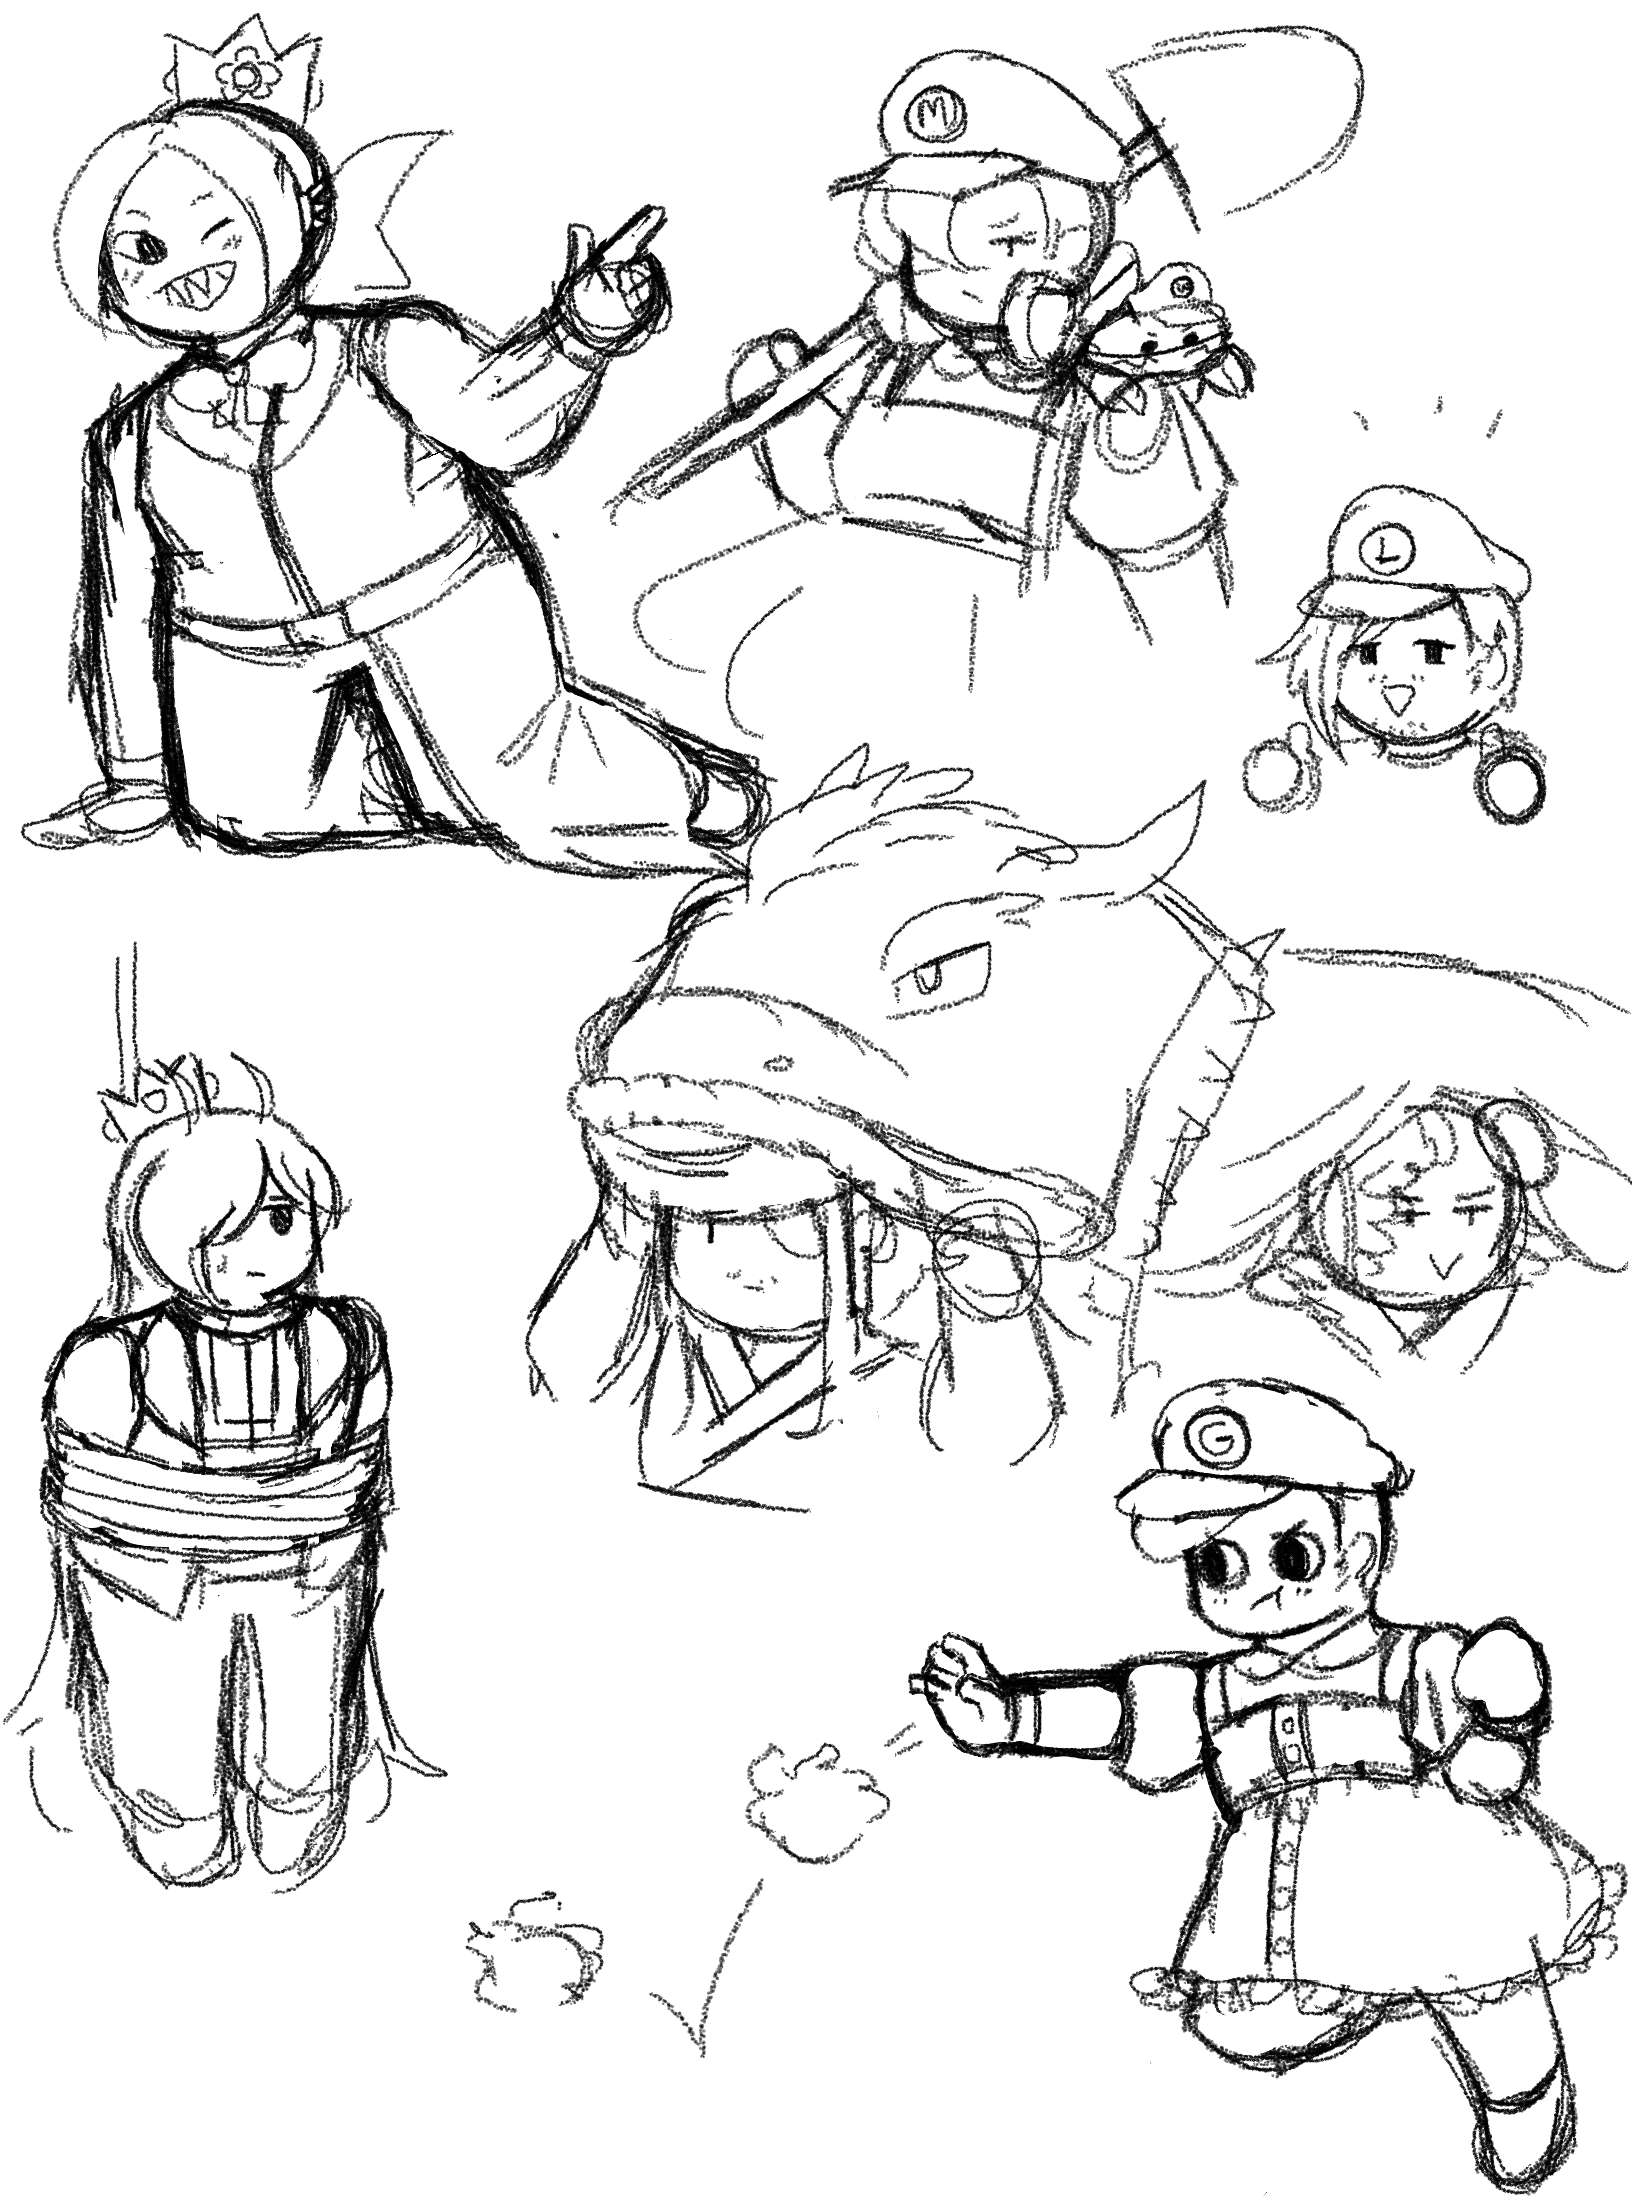 Various doodles of the All Aboard Lodestar cast in Mario-like costumes Keahi (Daisy), Mirabelle (Wario), Windchime (Waluigi), Luning (Luigi), Jove and Ambrose (Bowser), Pistol (Peach), and Goby (Mario)